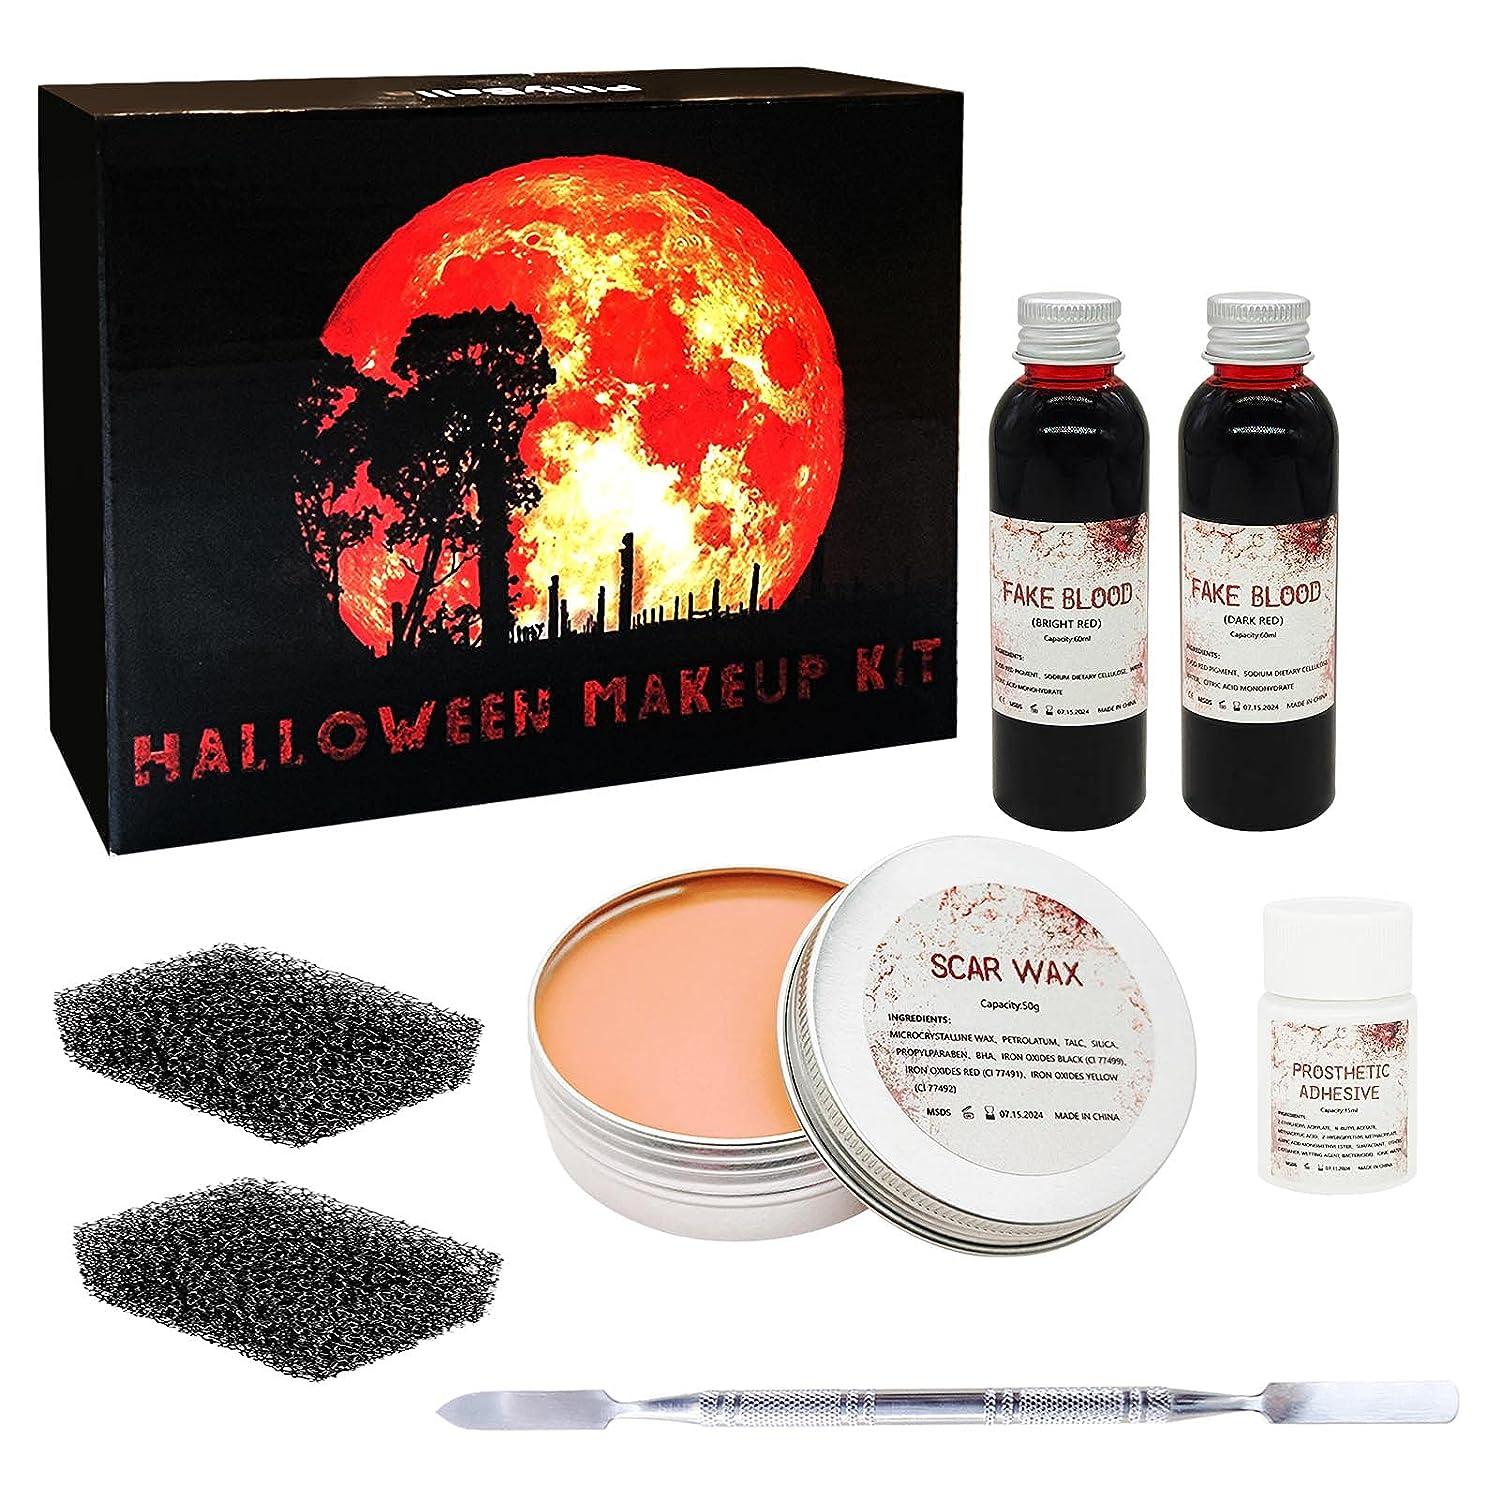 immetee Scar Wax SFX Makeup Kit, Face & Body Paint, Christmas Halloween Makeup  Kit, Fake Blood, Painting Brushes, Spatula, Stipple Sponge, Stage  Theatrical Party Cosplay, Carnival